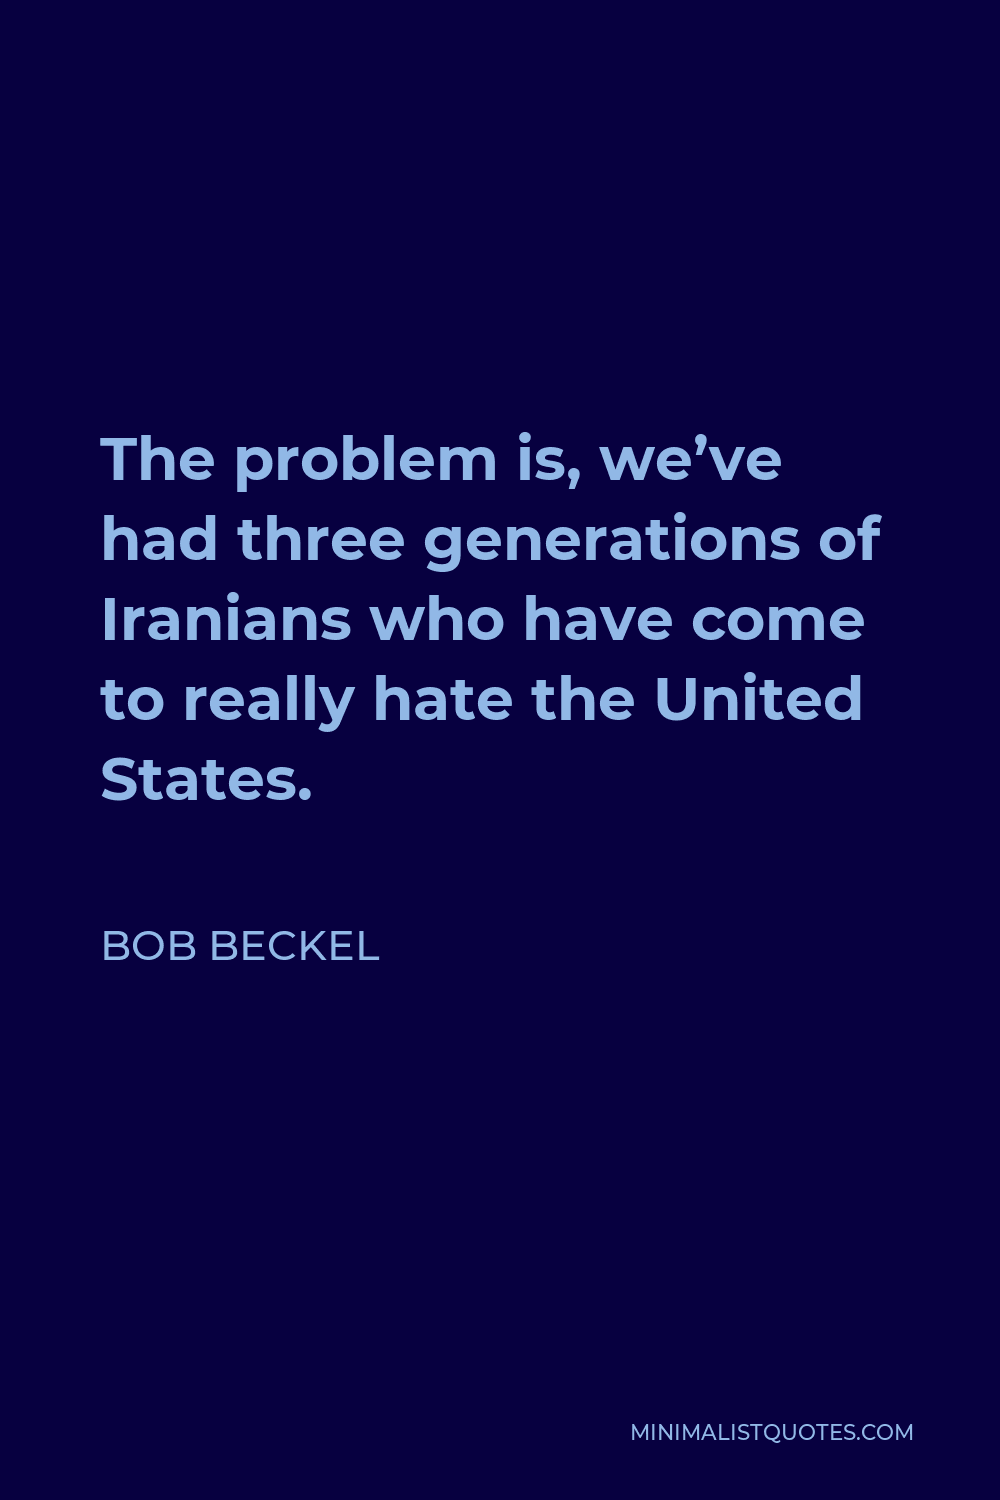 Bob Beckel Quote - The problem is, we’ve had three generations of Iranians who have come to really hate the United States.